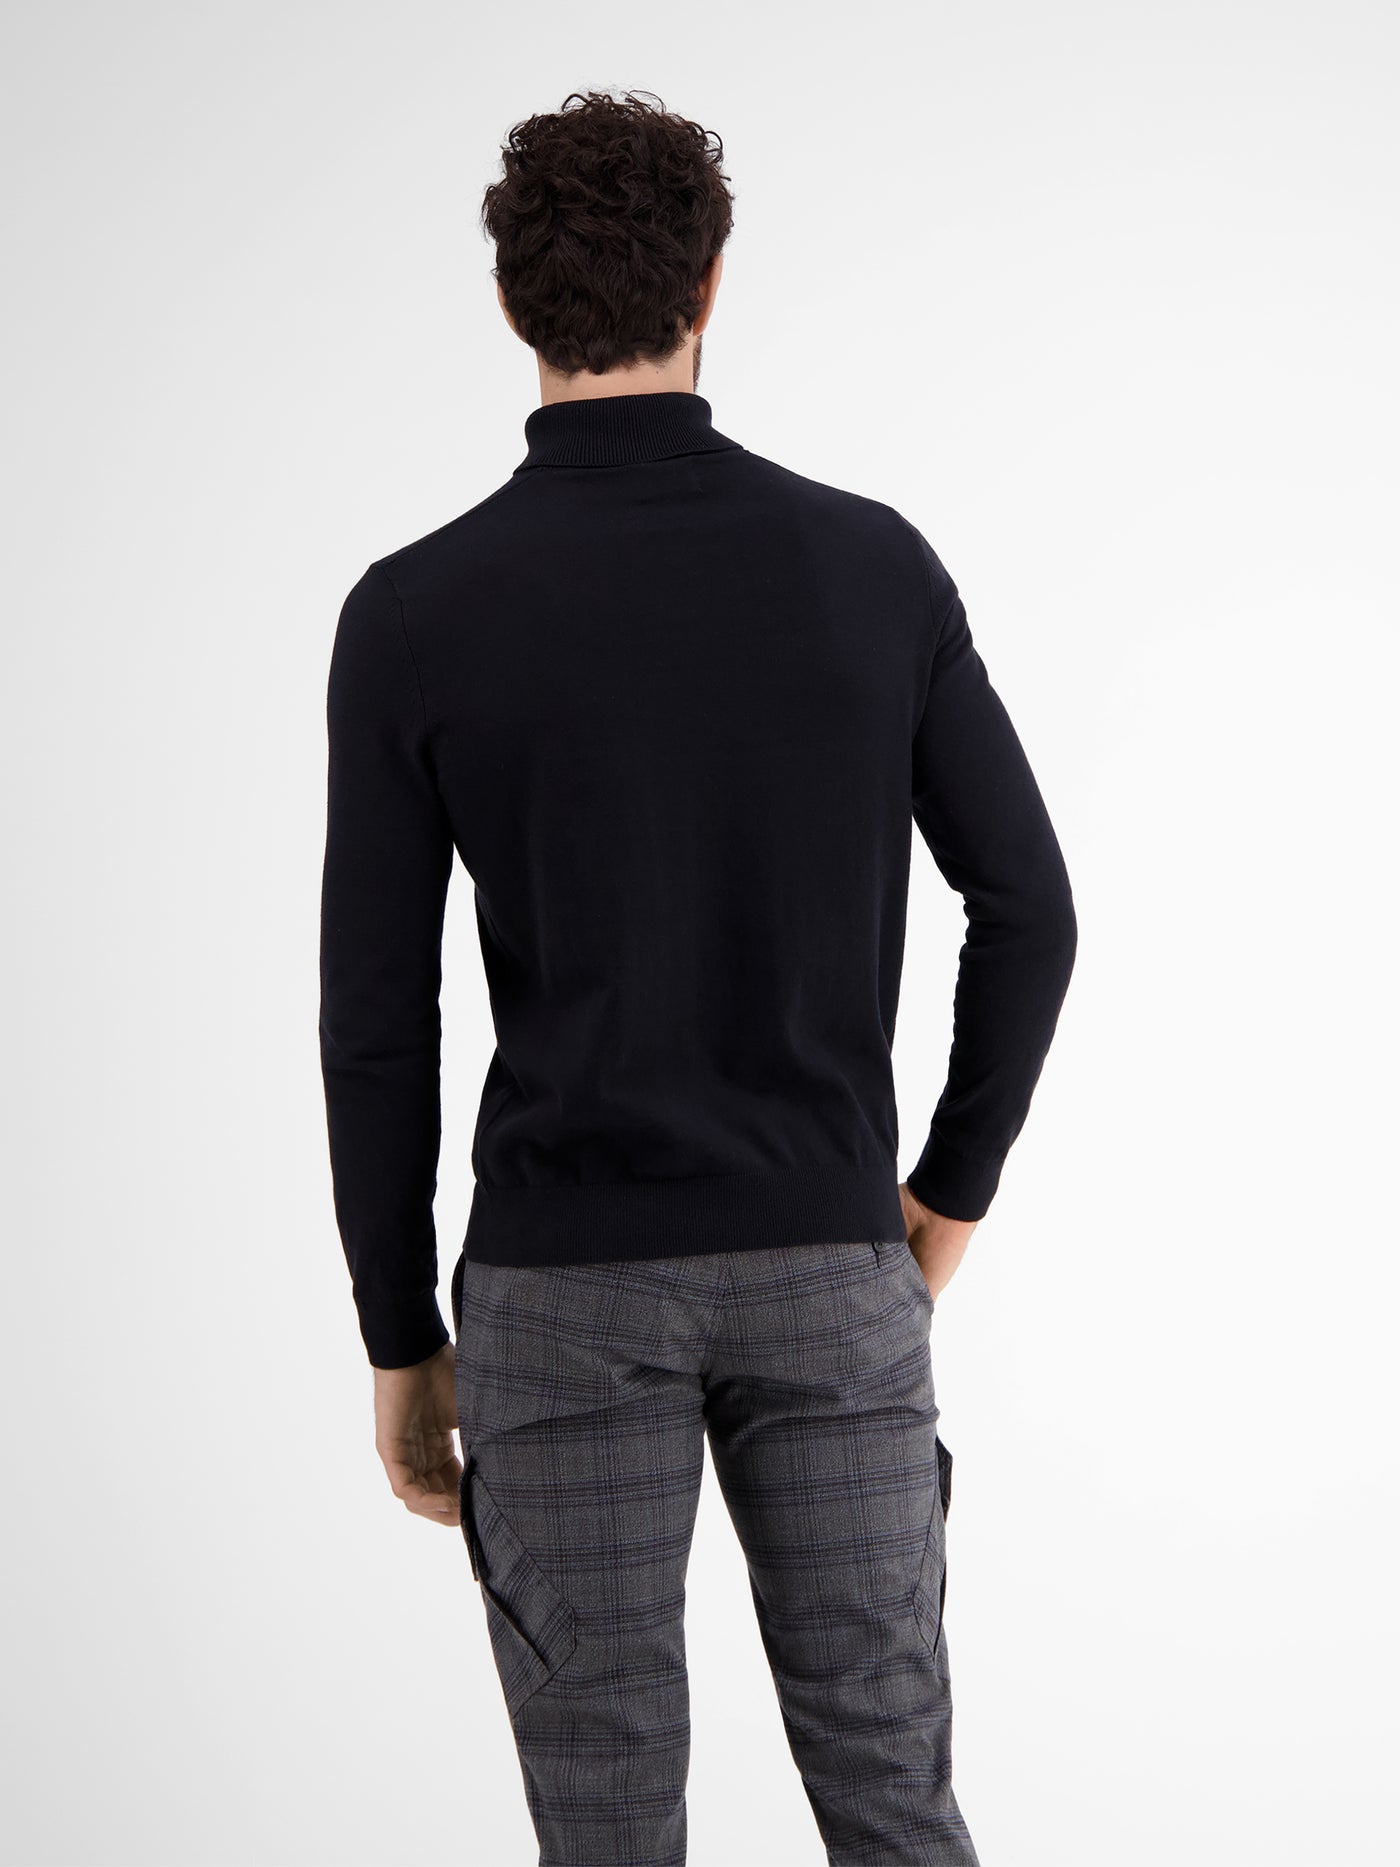 Turtleneck sweater in flat knit quality